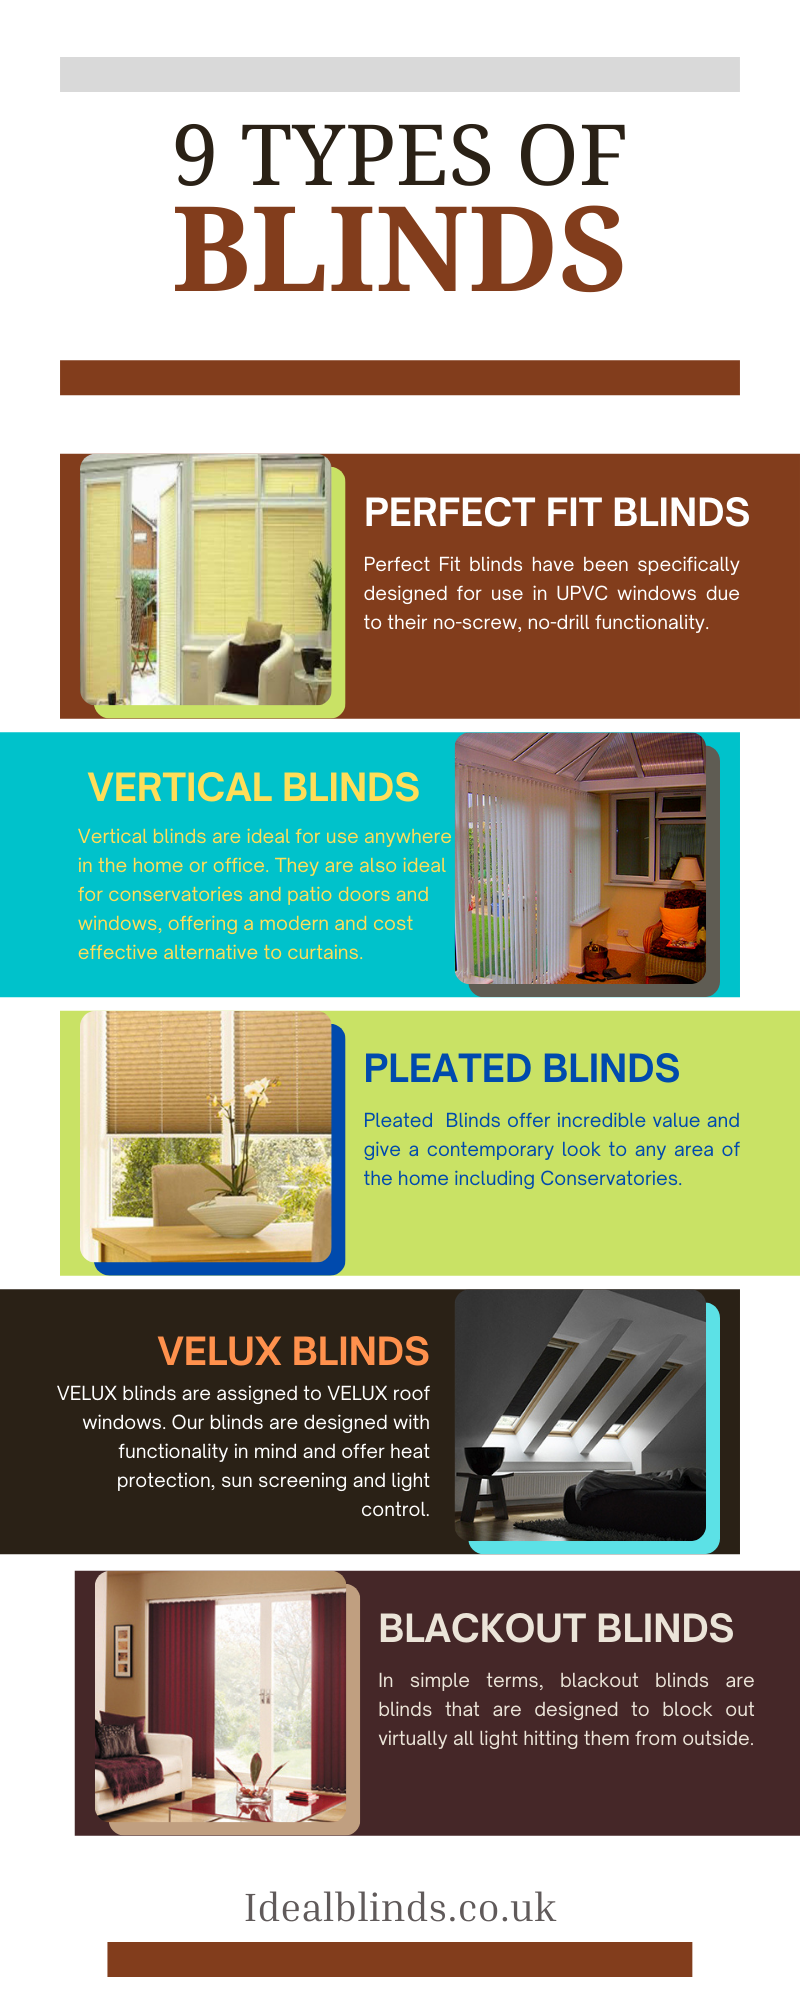 9 Types of Blinds